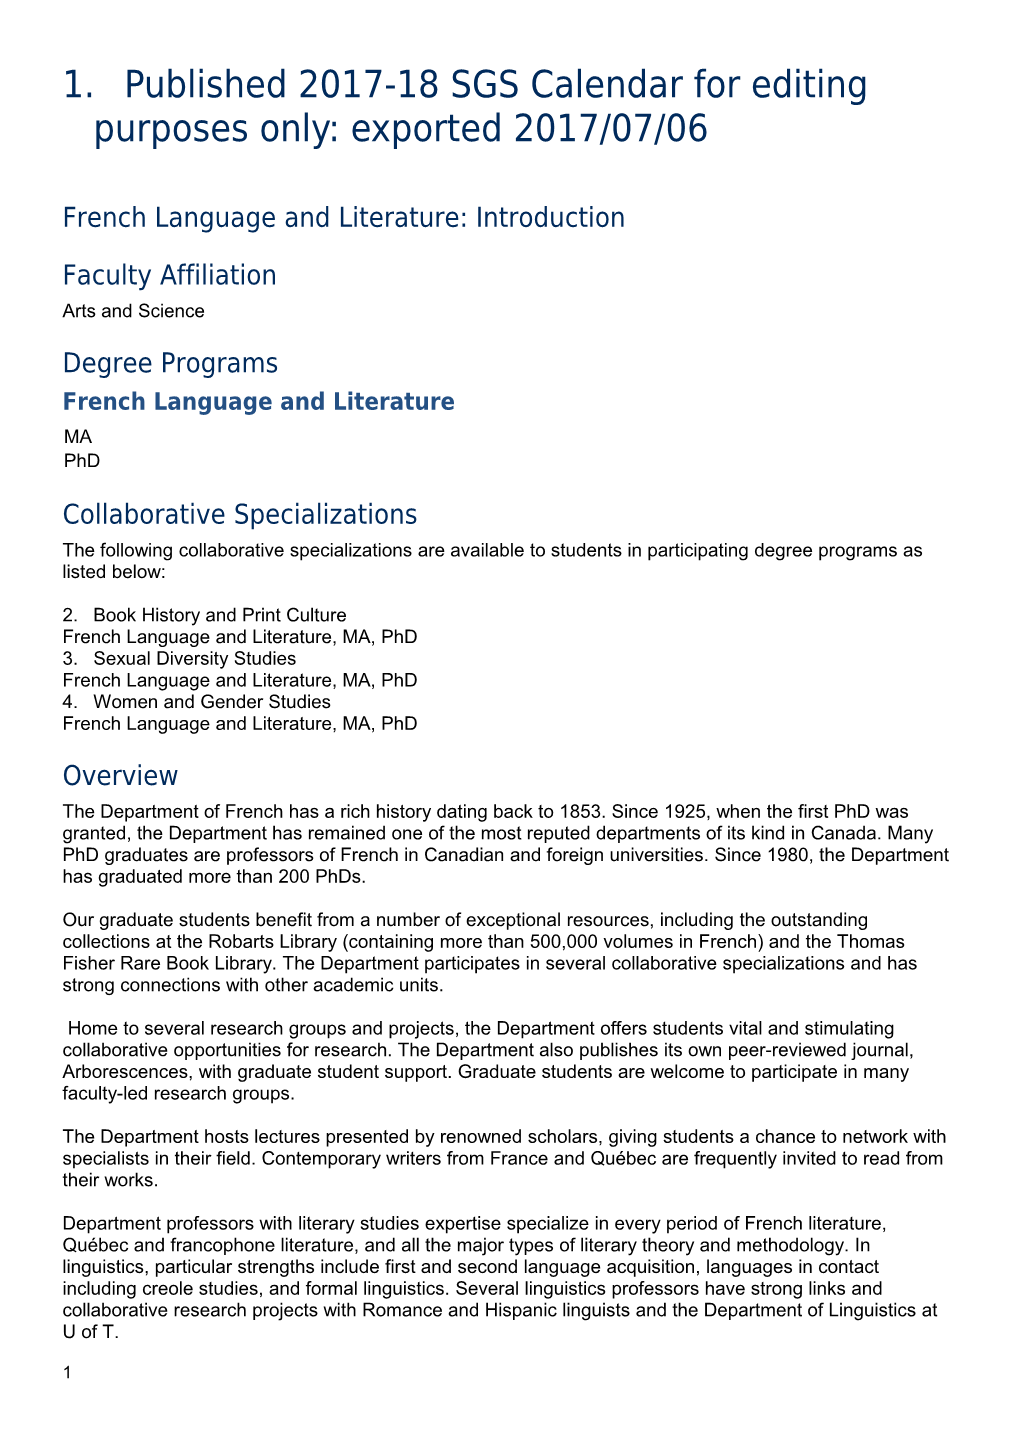 French Language and Literature